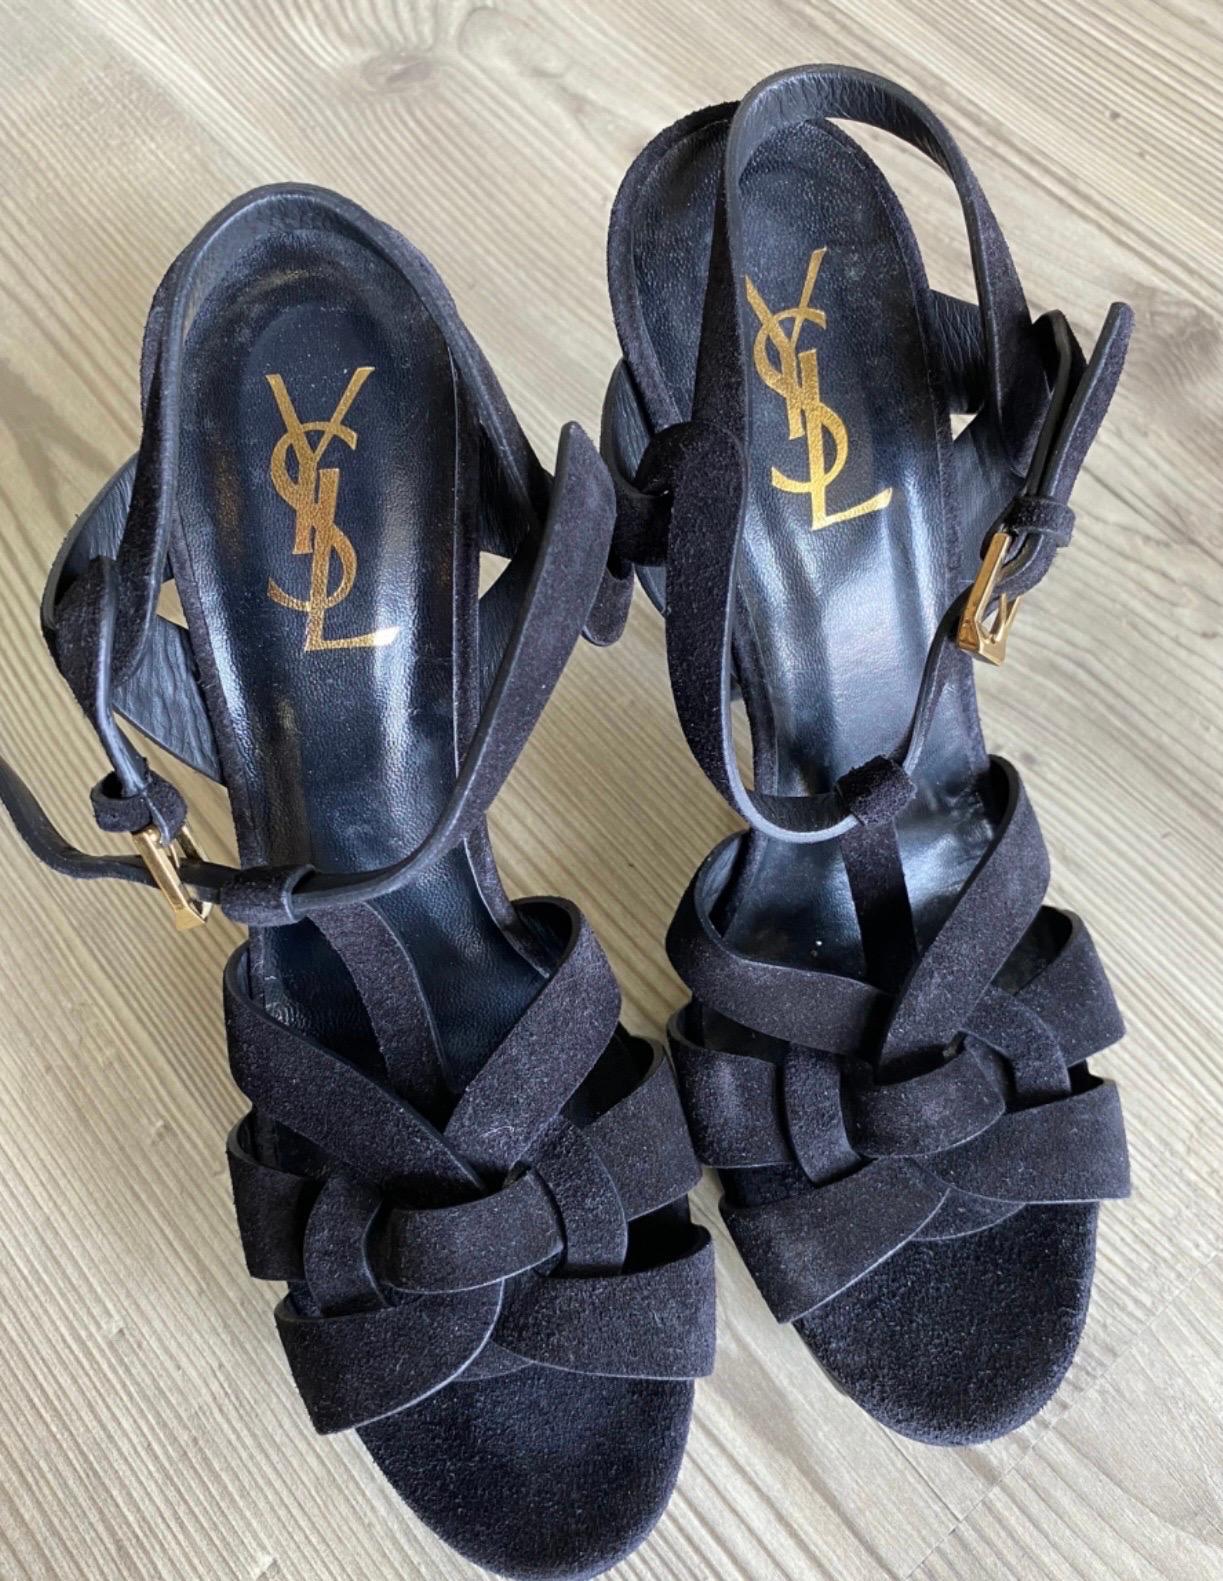 YSL Tribute sandals in black suede, size 39.5 with platform. measurements: 14 cm heel, 3 cm wedge, 26 cm insole, never used but there is a small mark on the heel, as shown in the photograph. Good general conditions.